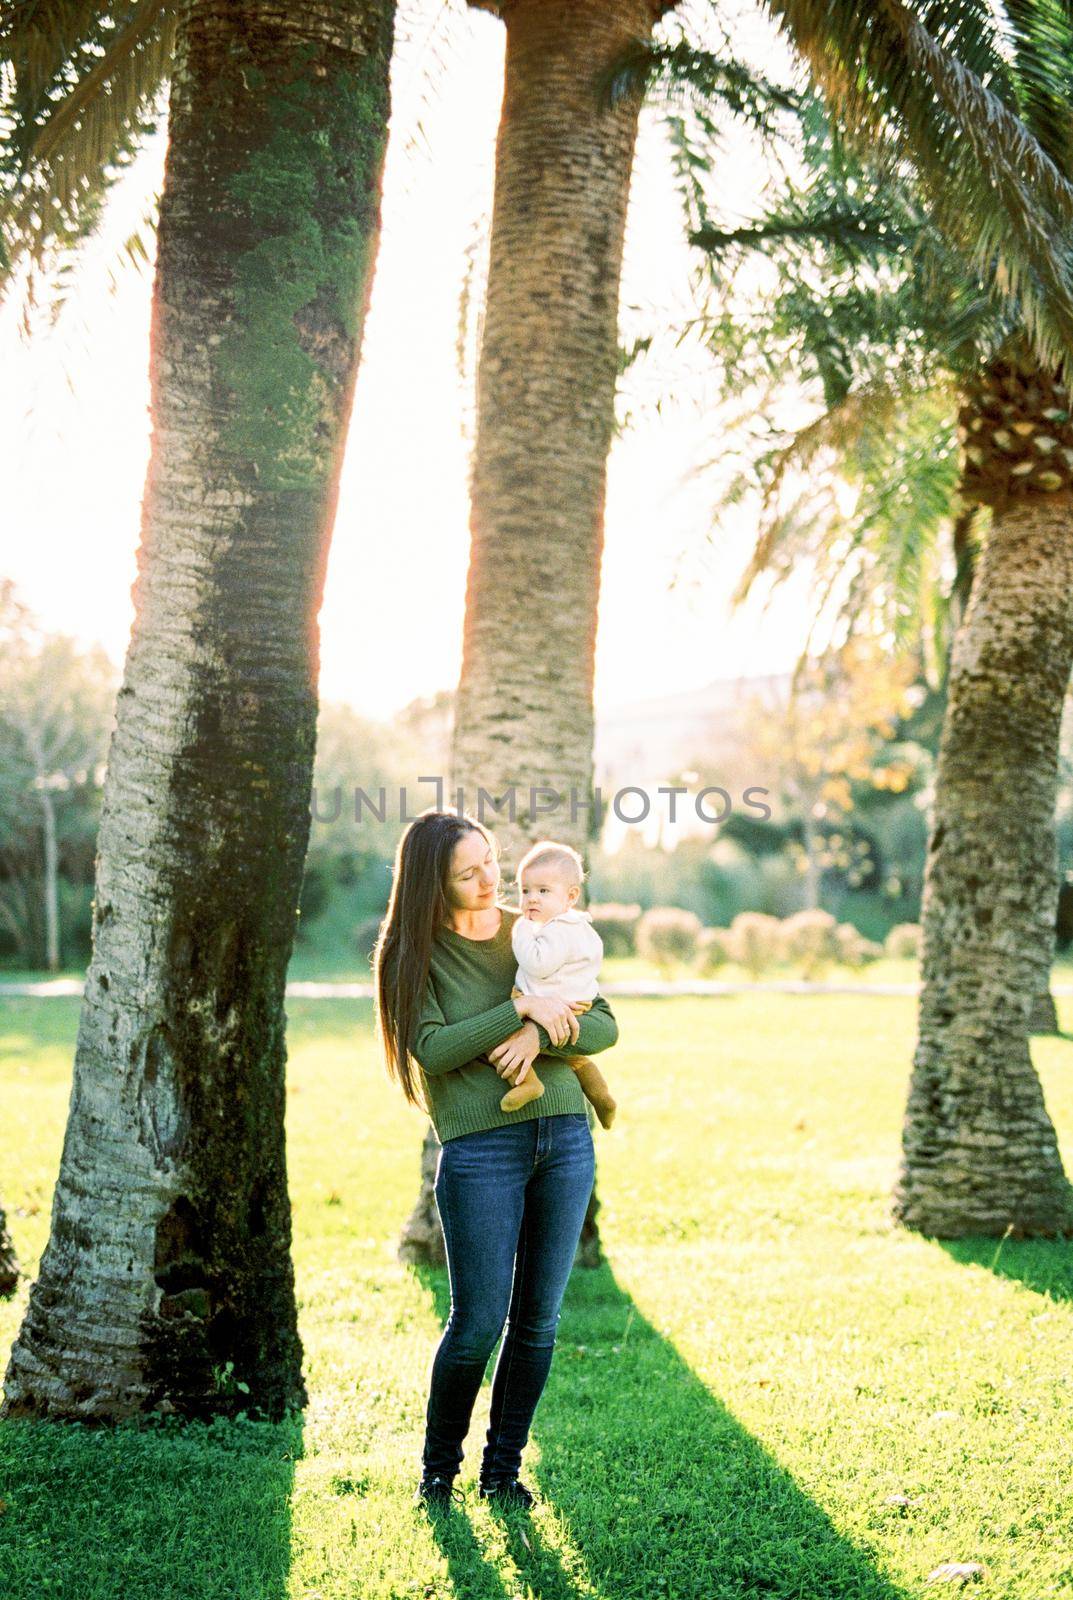 Mom looks at the baby in her arms while standing under a large palm tree. High quality photo